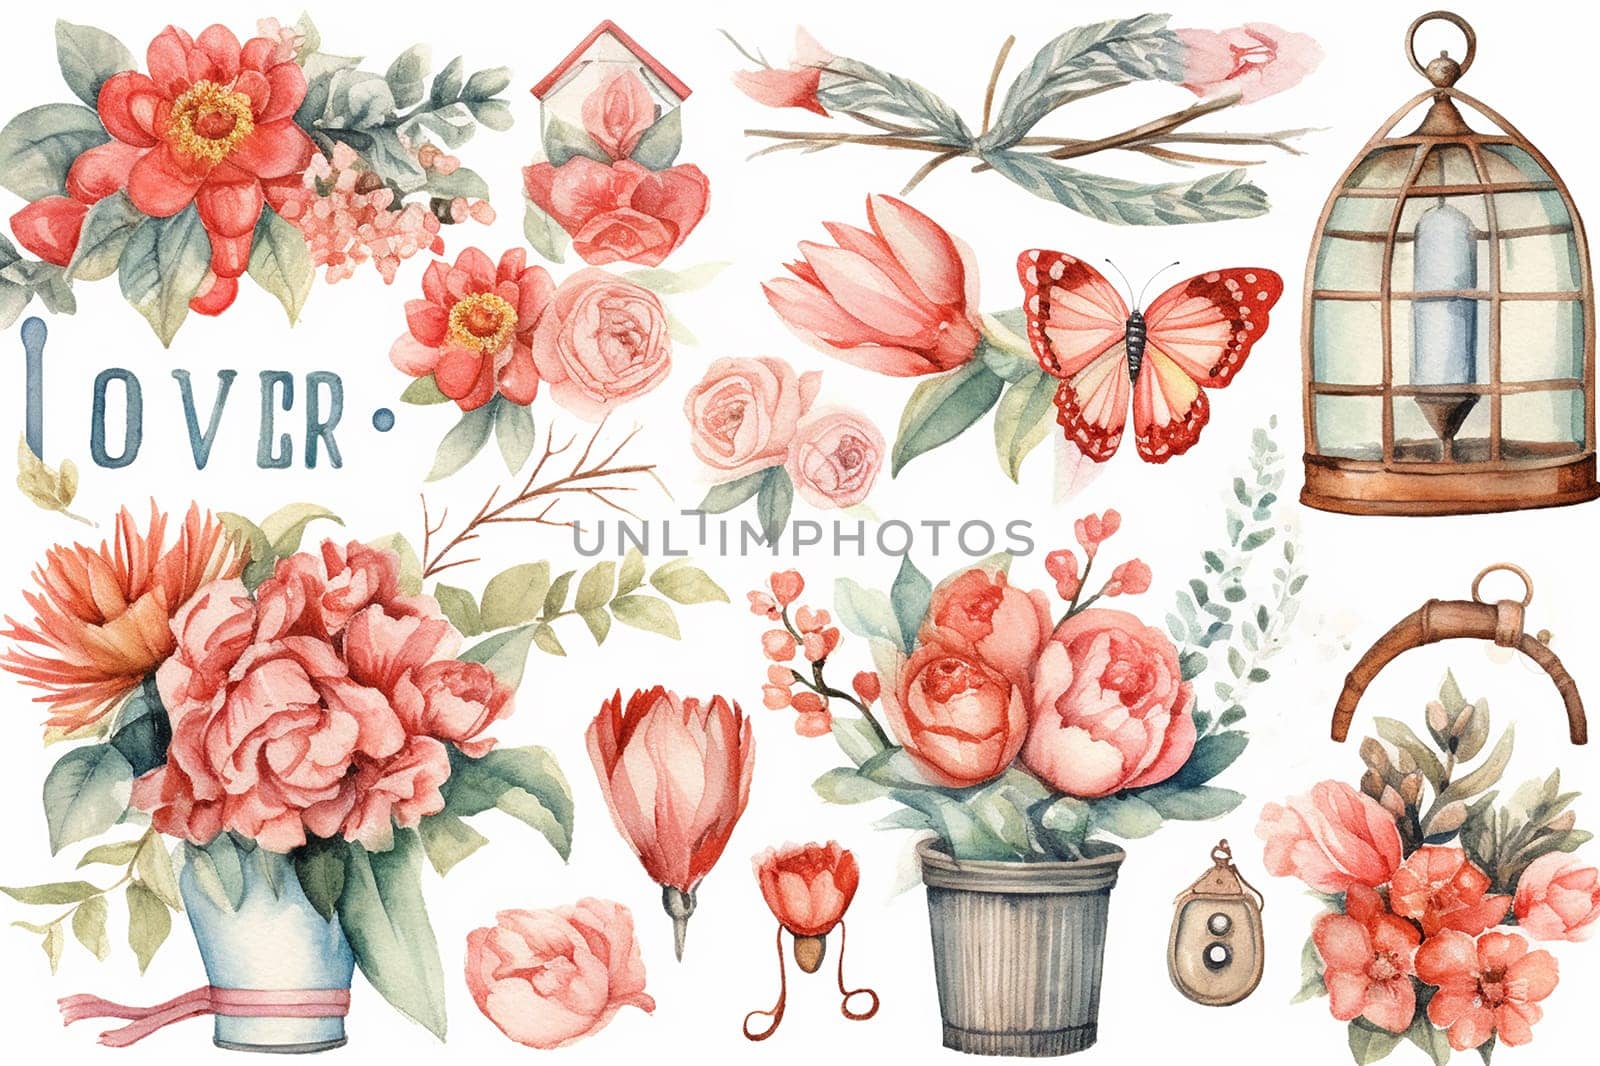 A collection of watercolor illustrations including flowers, a butterfly, and romantic-themed objects. by Hype2art